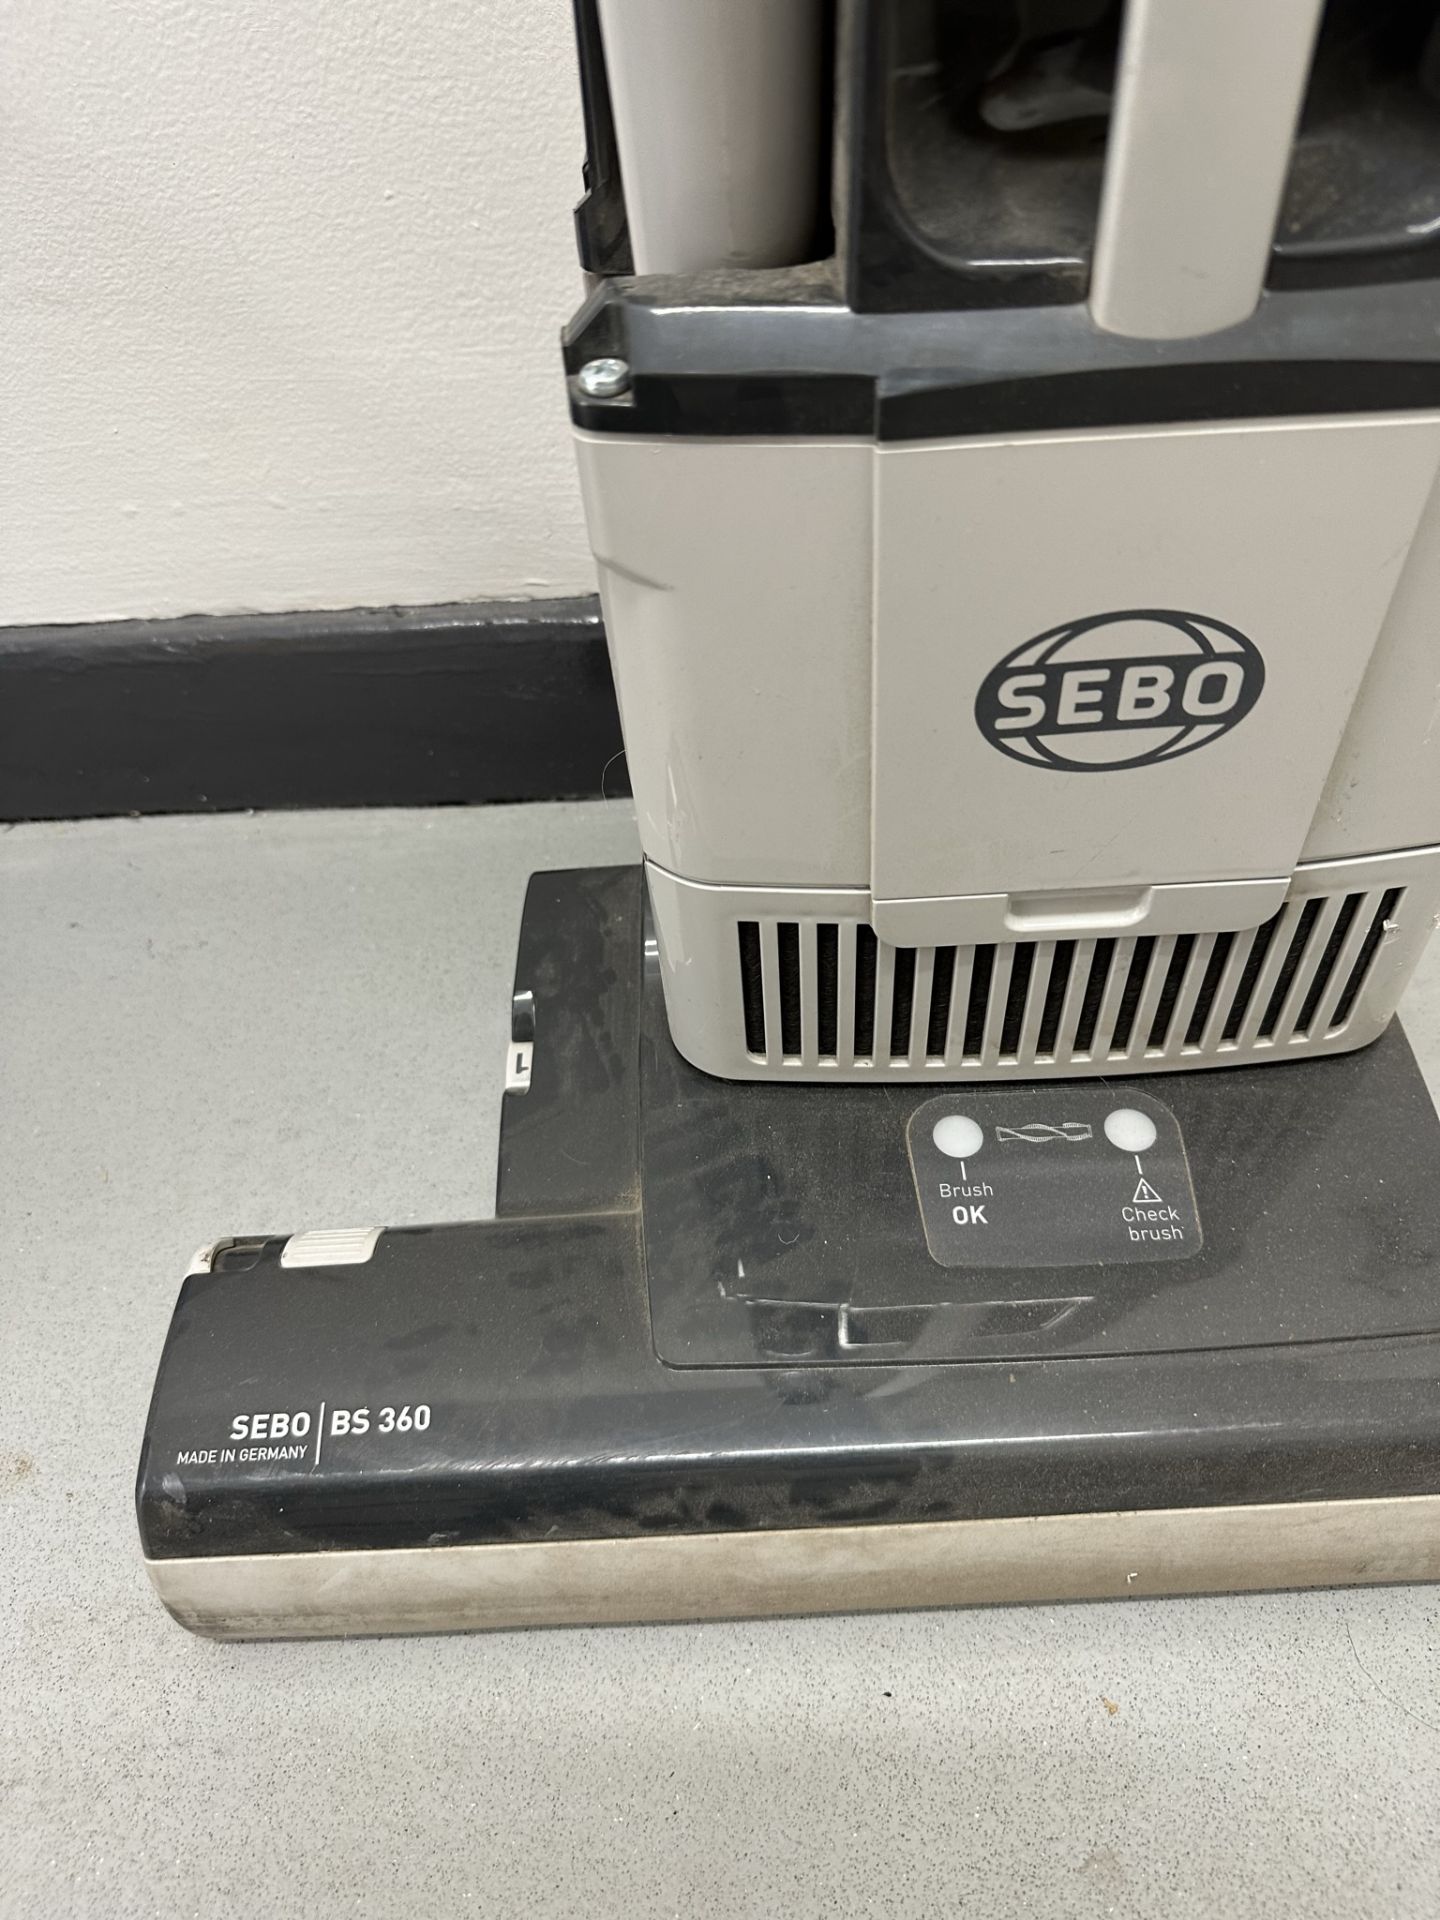 Sebo BS360 Upright Vacuum Cleaner - Image 2 of 4